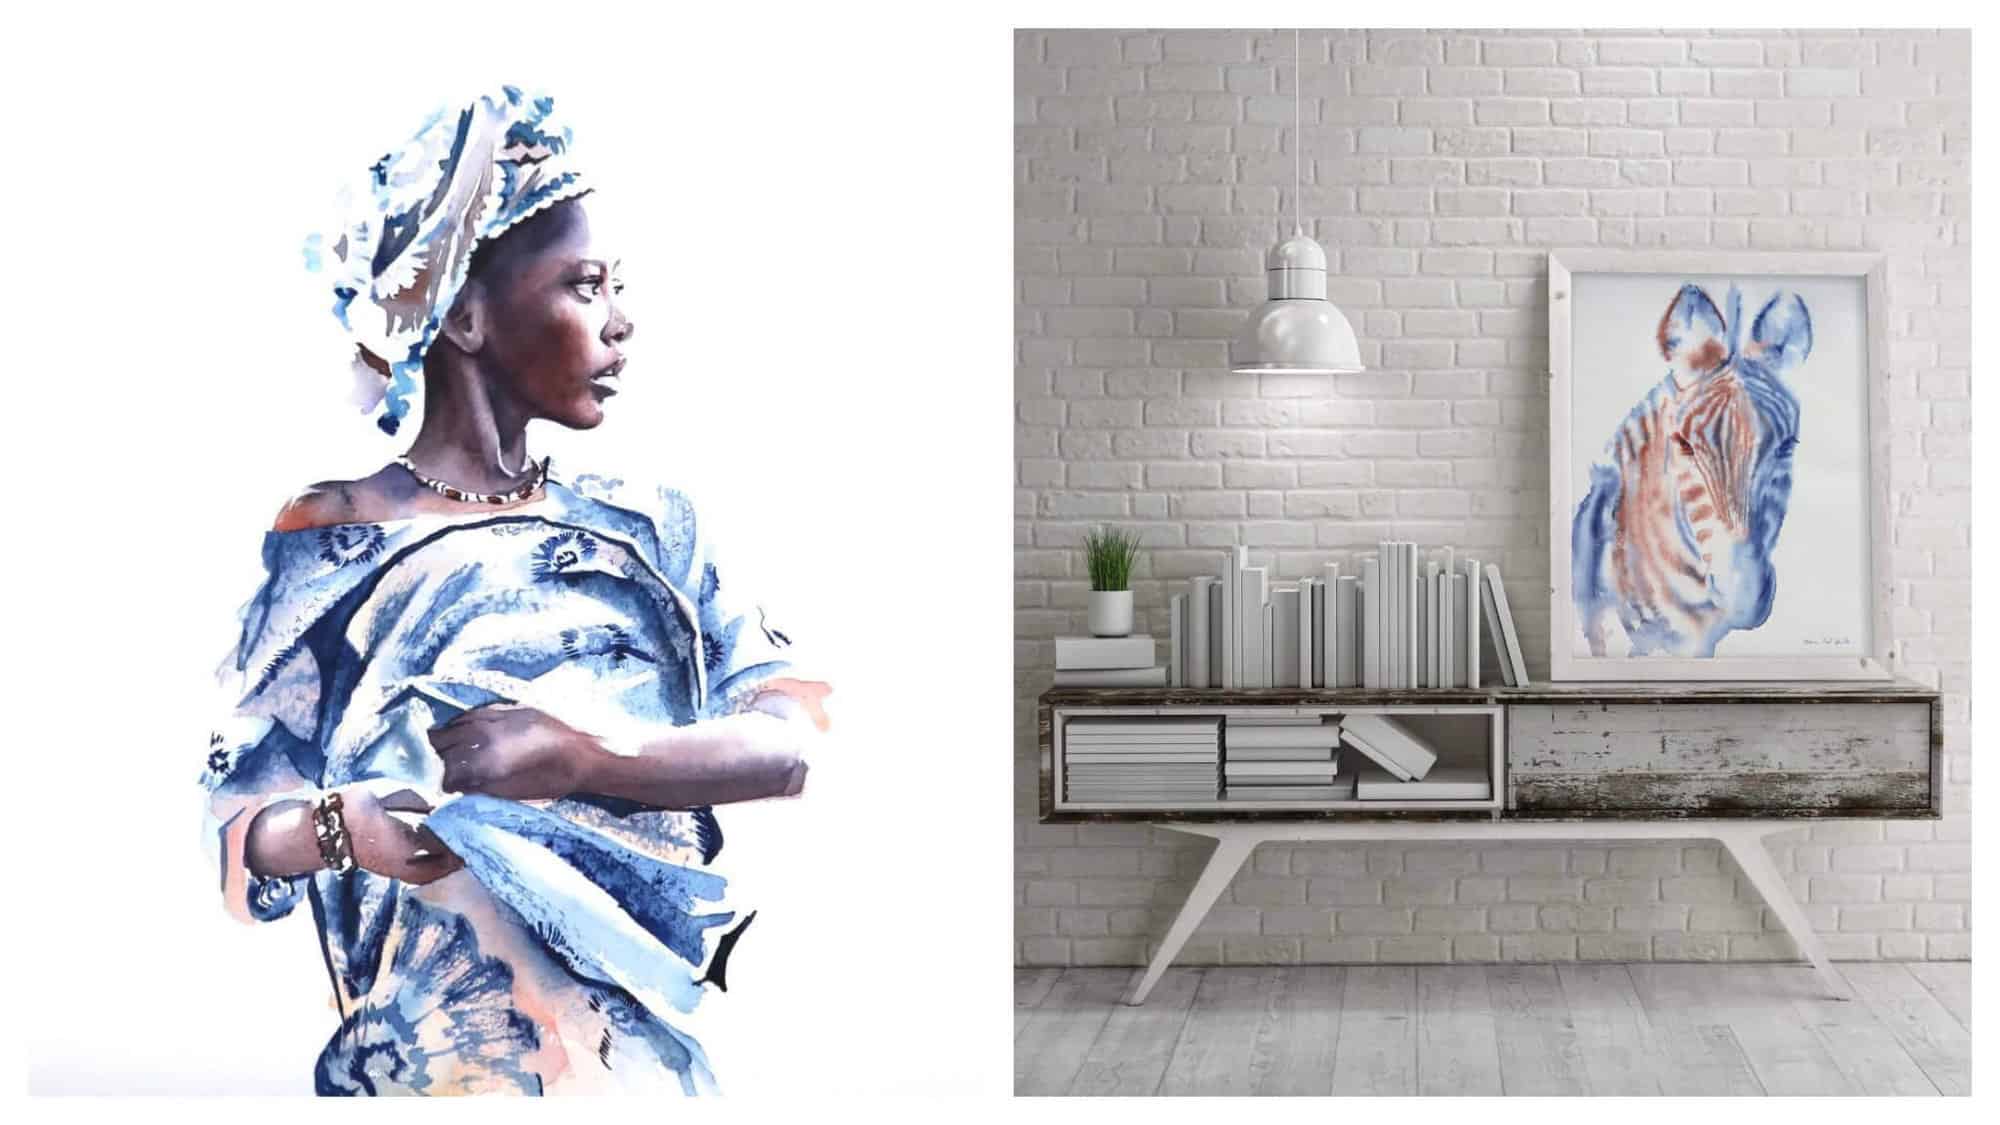 Left: A painting of a woman dressed in a blue and light orange dress and headdress. / Right: A horizontal book shelf is pictured in a white room with white brick walls. On top of the shelf, there is a painting of a zebra in blue and light orange.